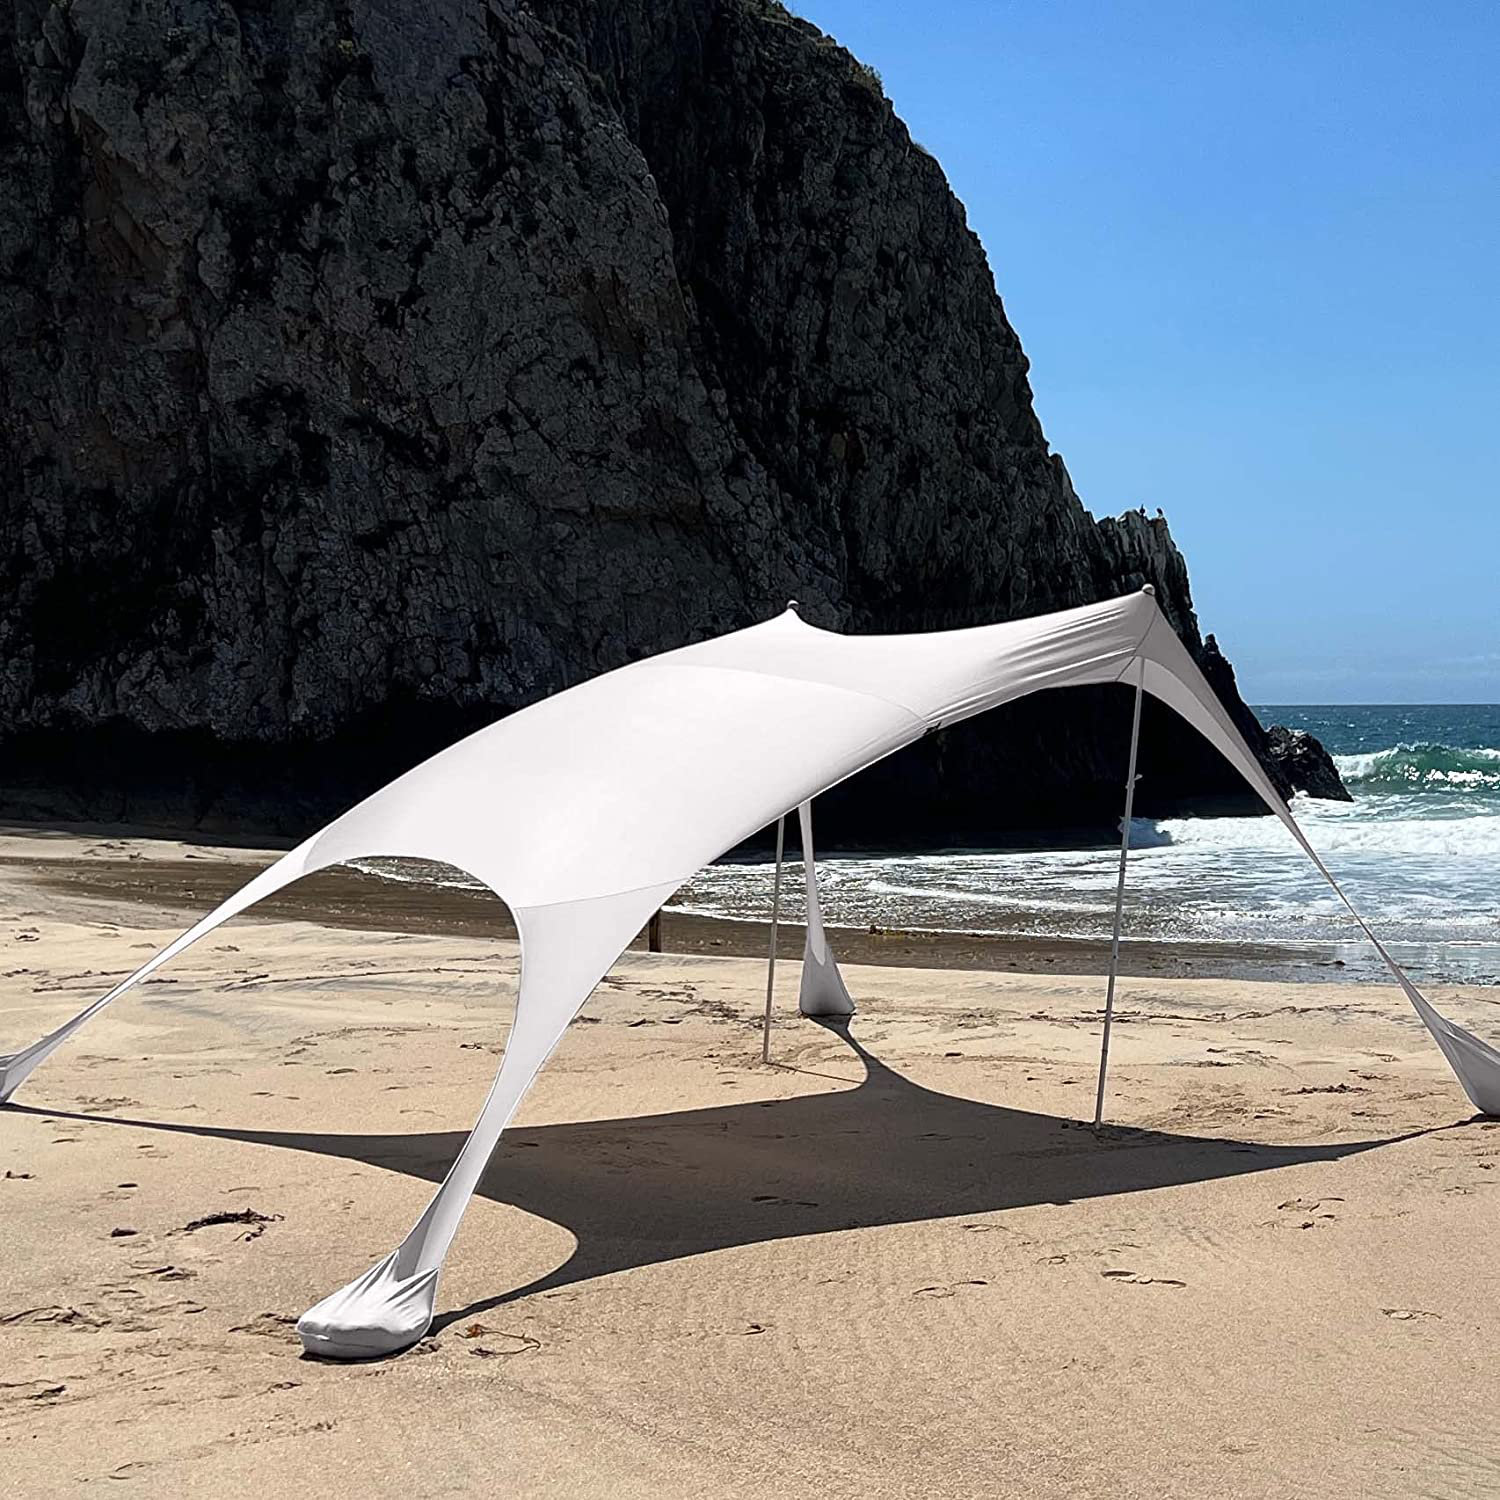 Sun Shelter Beach Shade Canopy by SkyBed, UPF 50+, Durable, Lightweight, 2-Pole, XL, Warm Gray